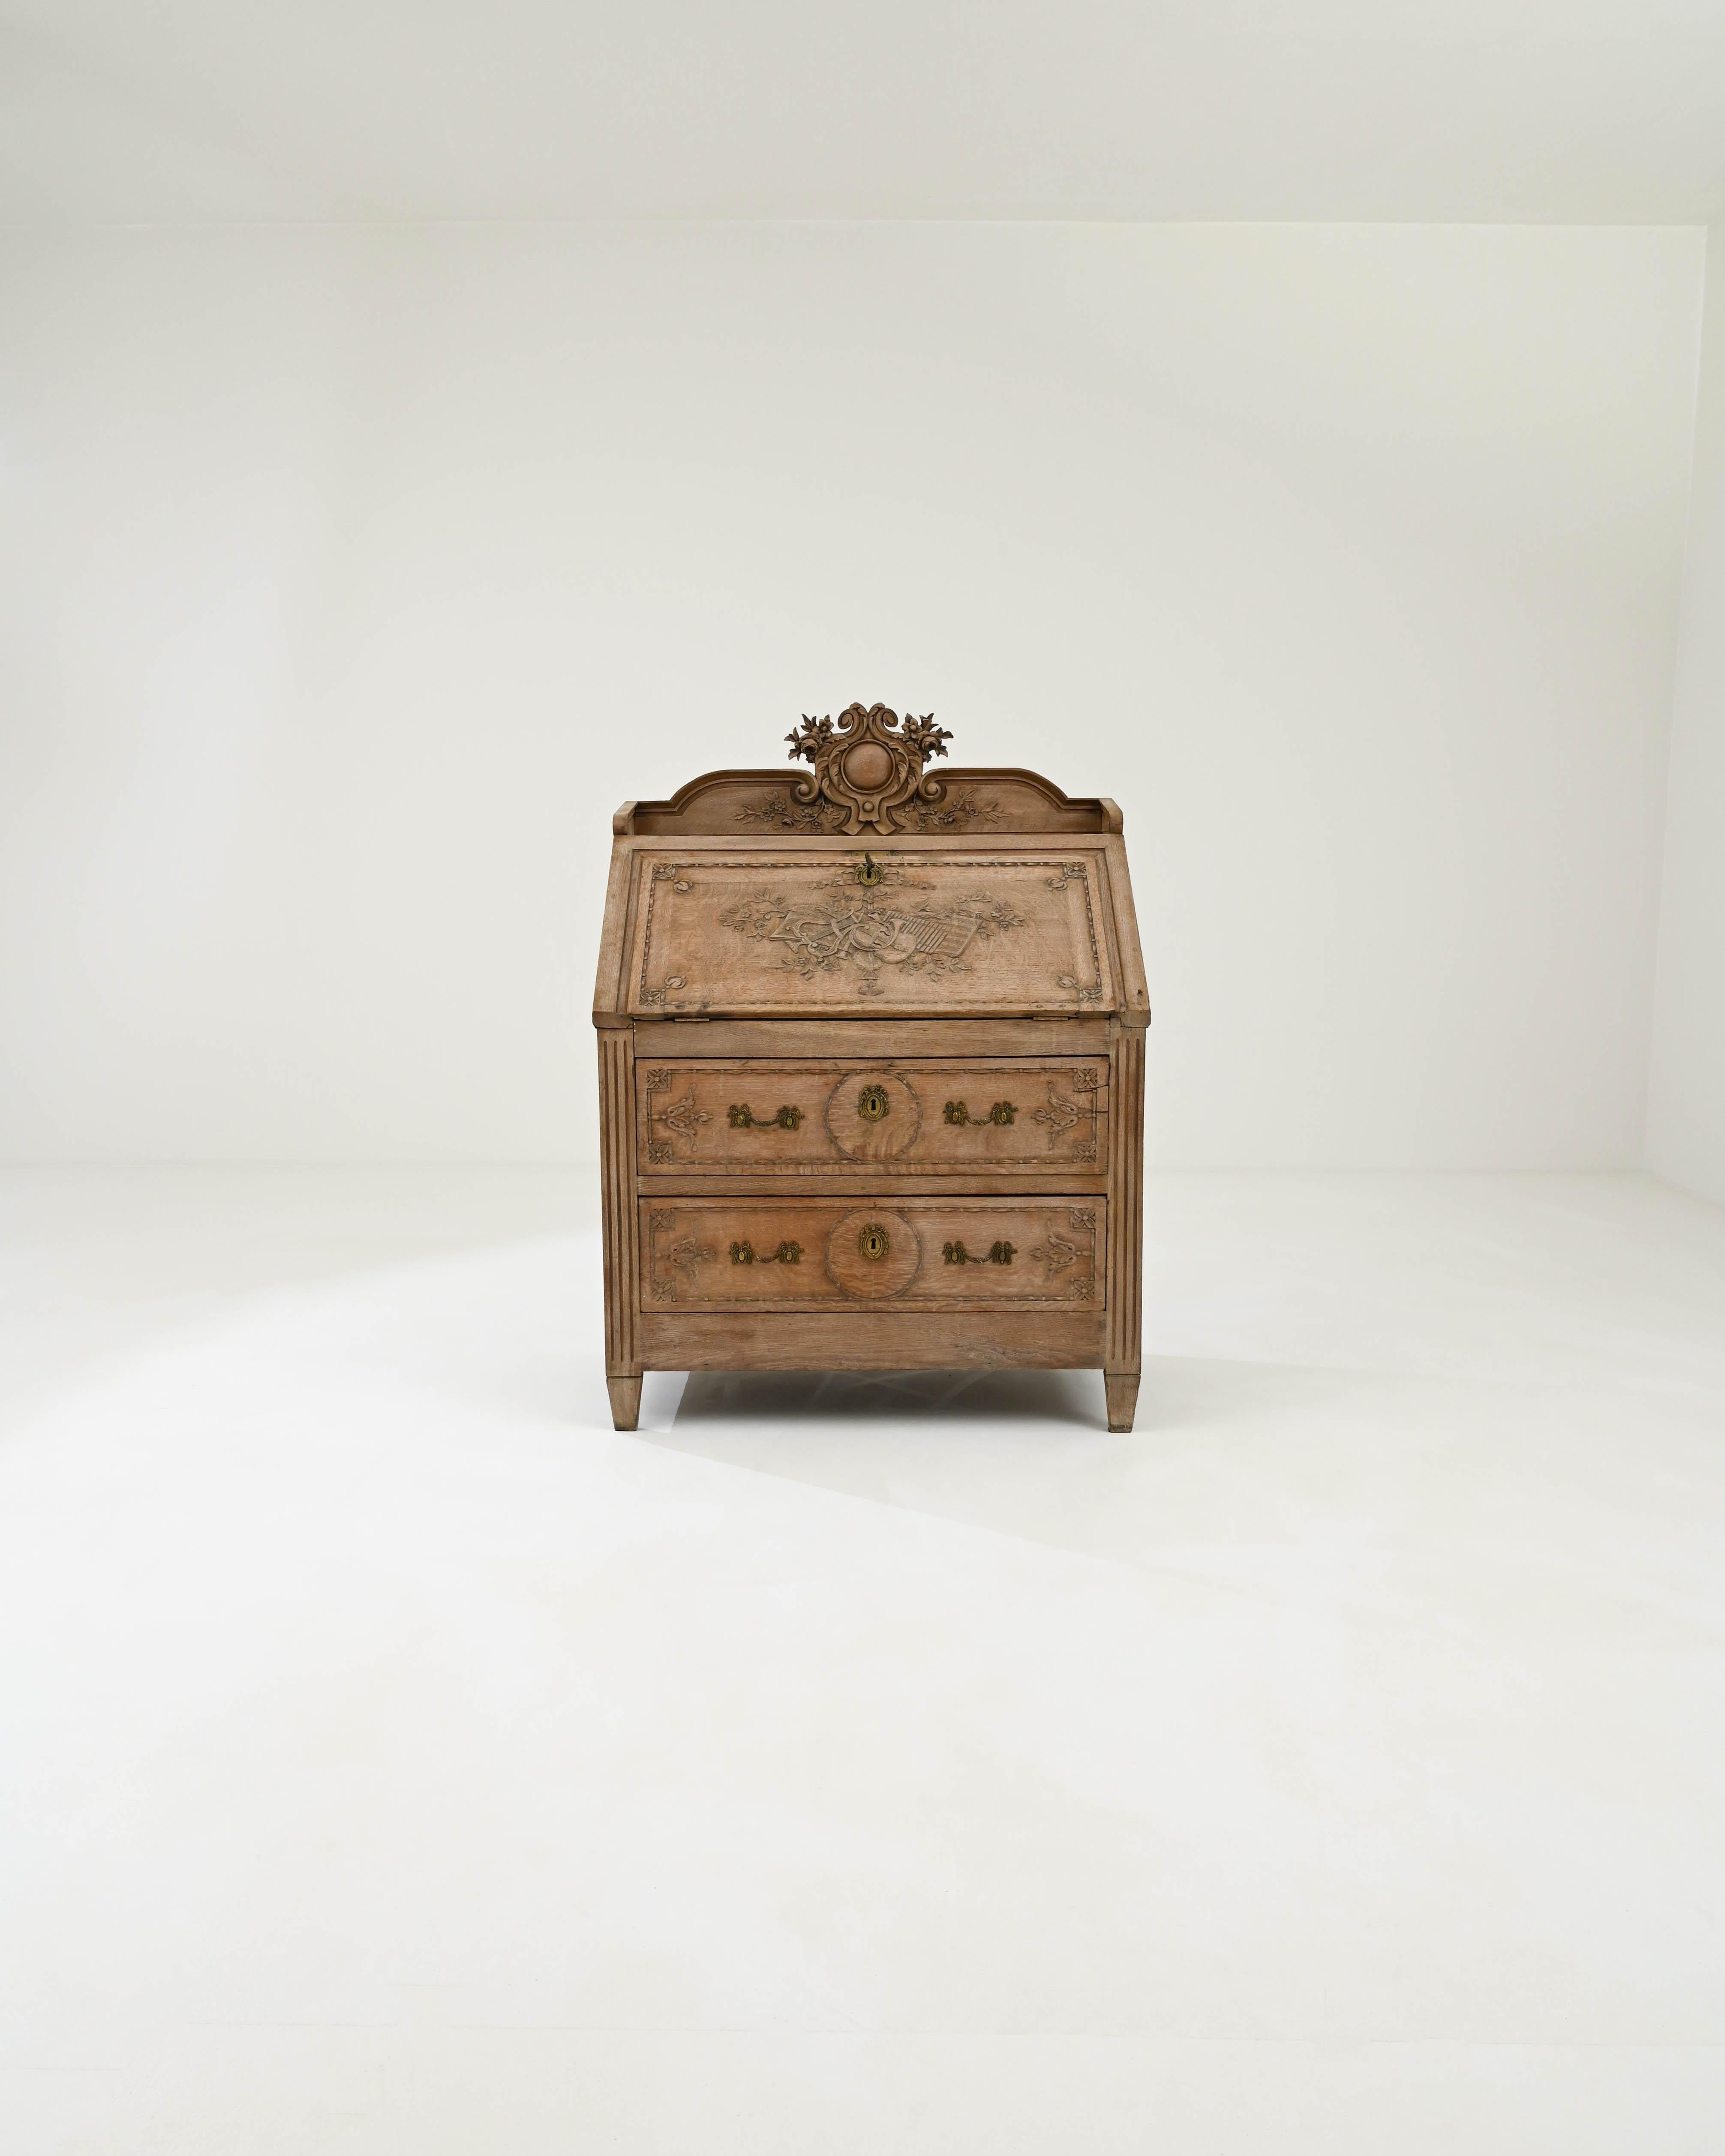 A wooden desk created in early 20th century France. A crest of musical instruments and vines is proudly engraved into the center of this illustrious desk, framed in by a series of floral and scroll motifs. A delicate bleaching process has been